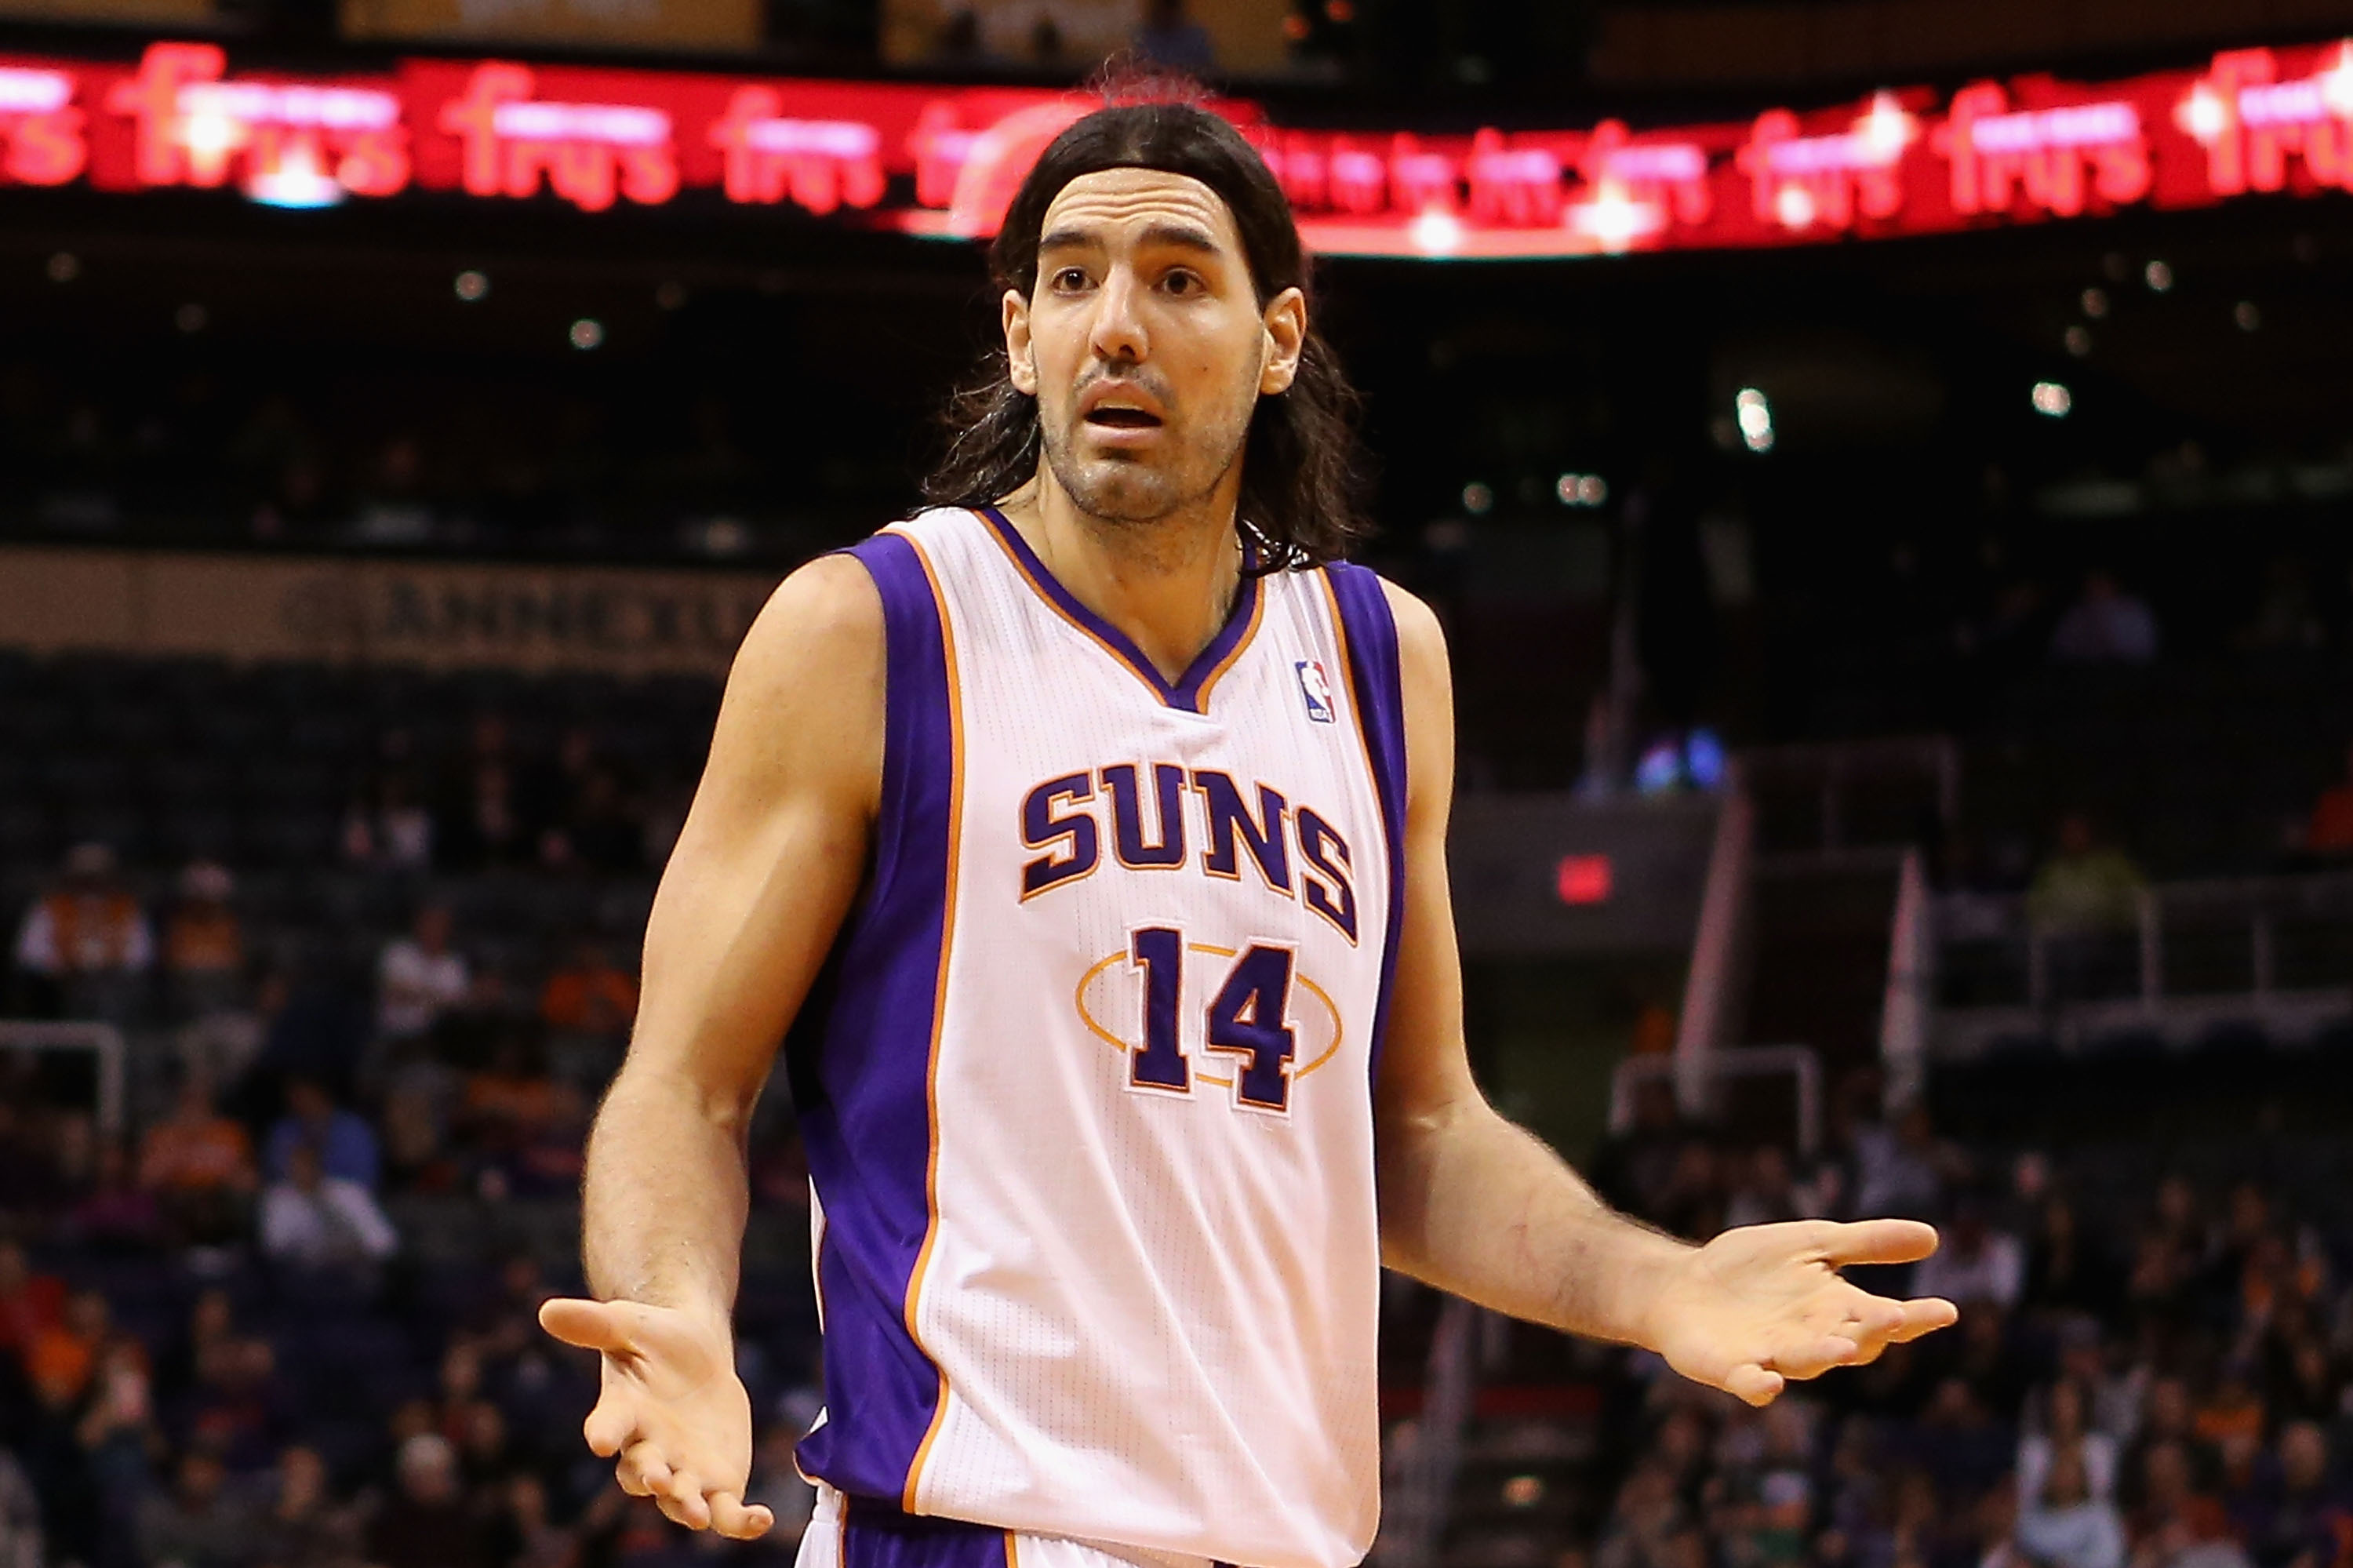 What other owner is playing full court?': Luis Scola's transition from the  NBA to owning an Italian basketball team - The Athletic